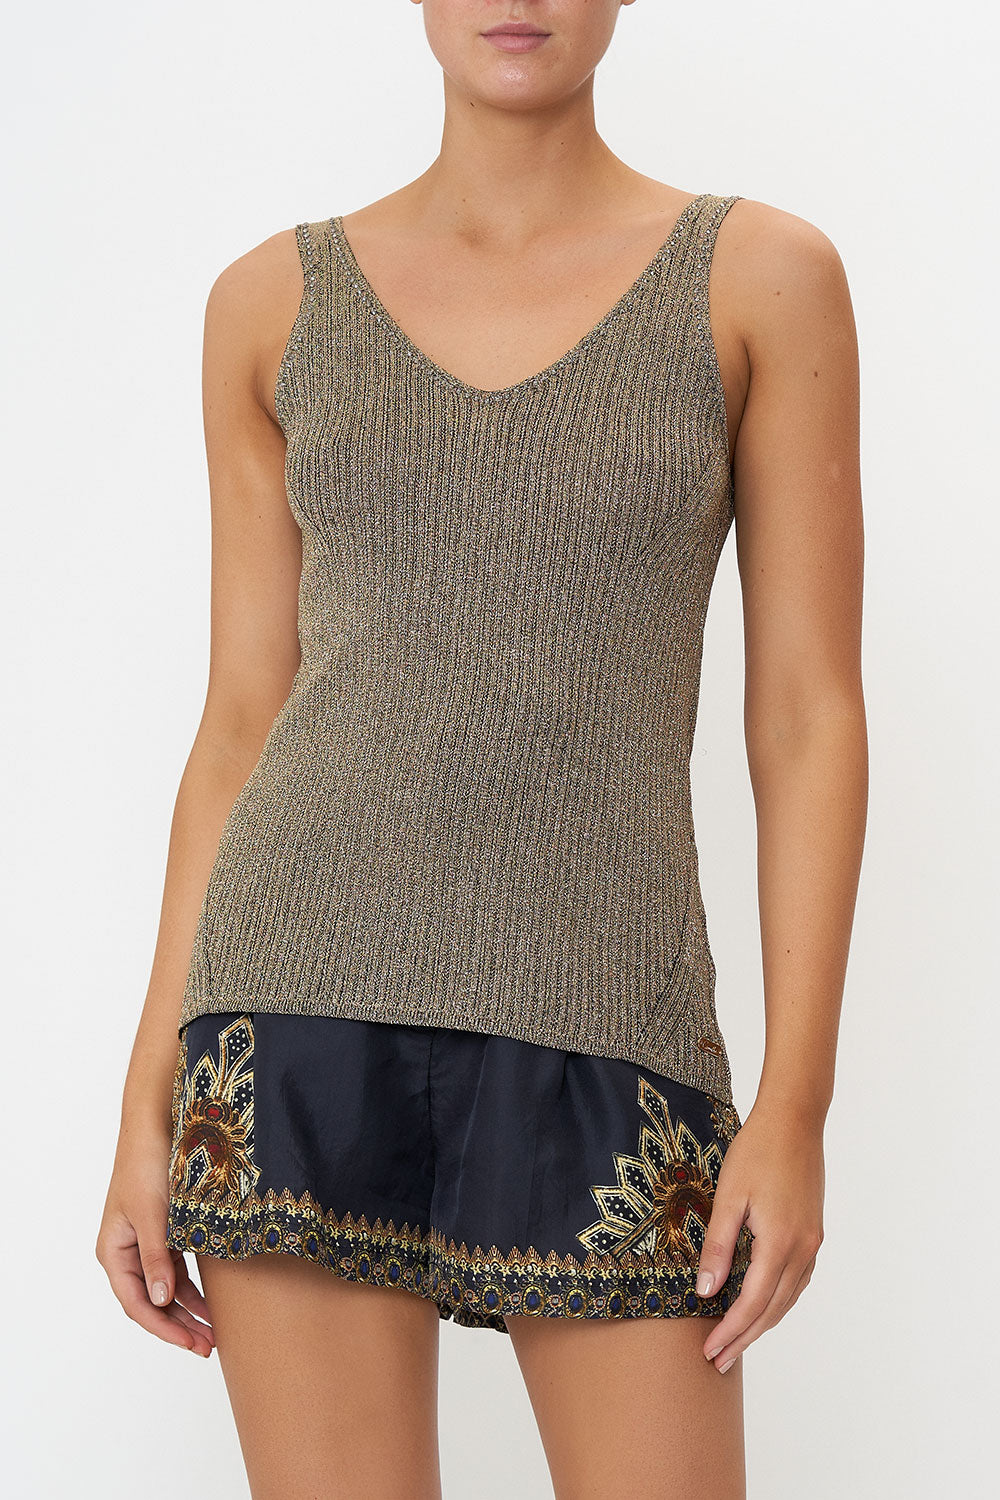 KNIT CAMI ITS ALL OVER TORERO